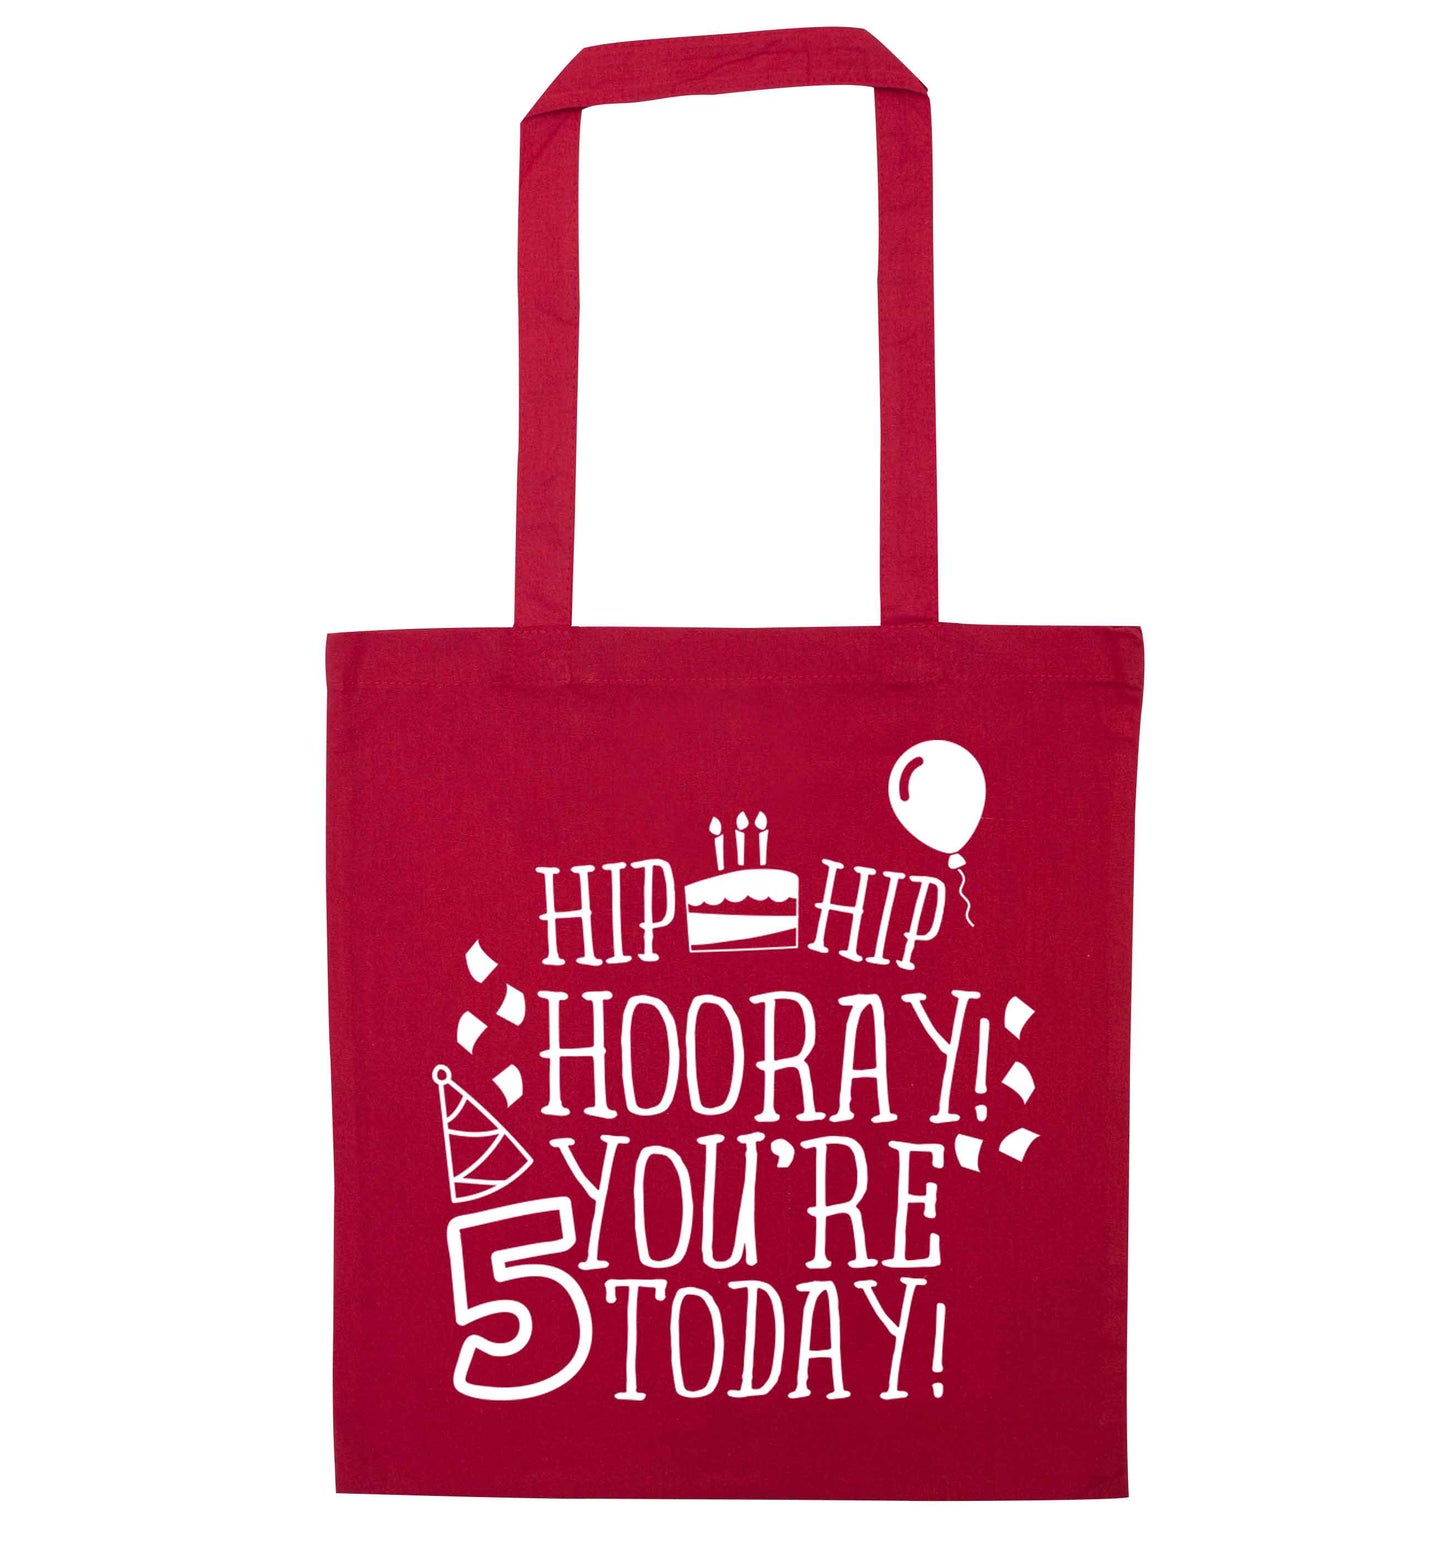 Hip hip hooray you're five today! red tote bag